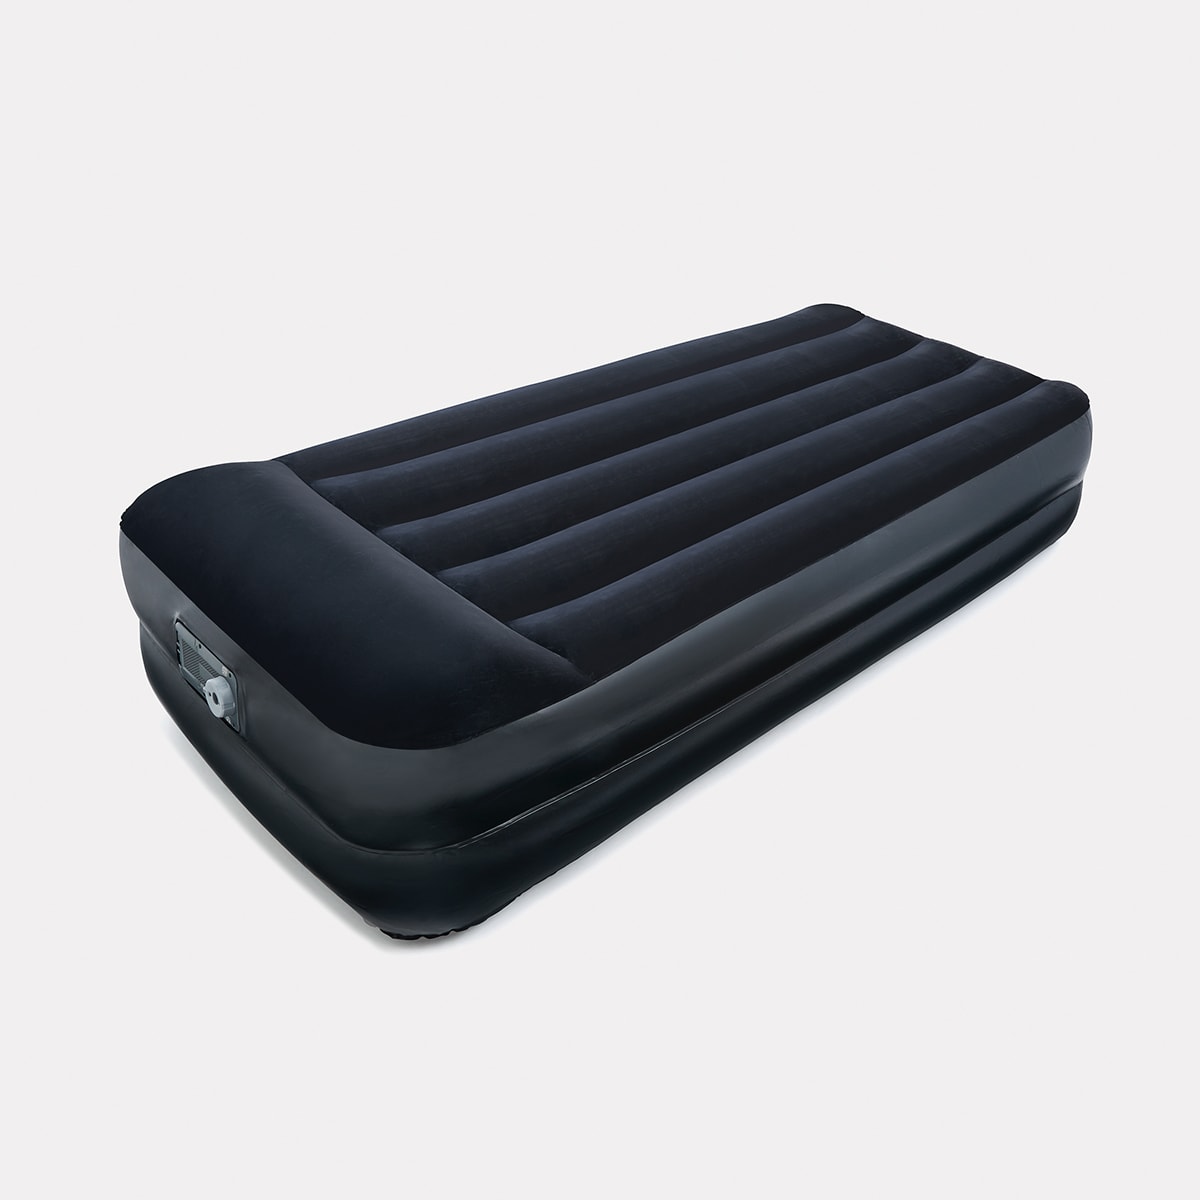 Single Inflatable High Raised Air Bed Mattress Airbed w/ Built-in Electric Pump 